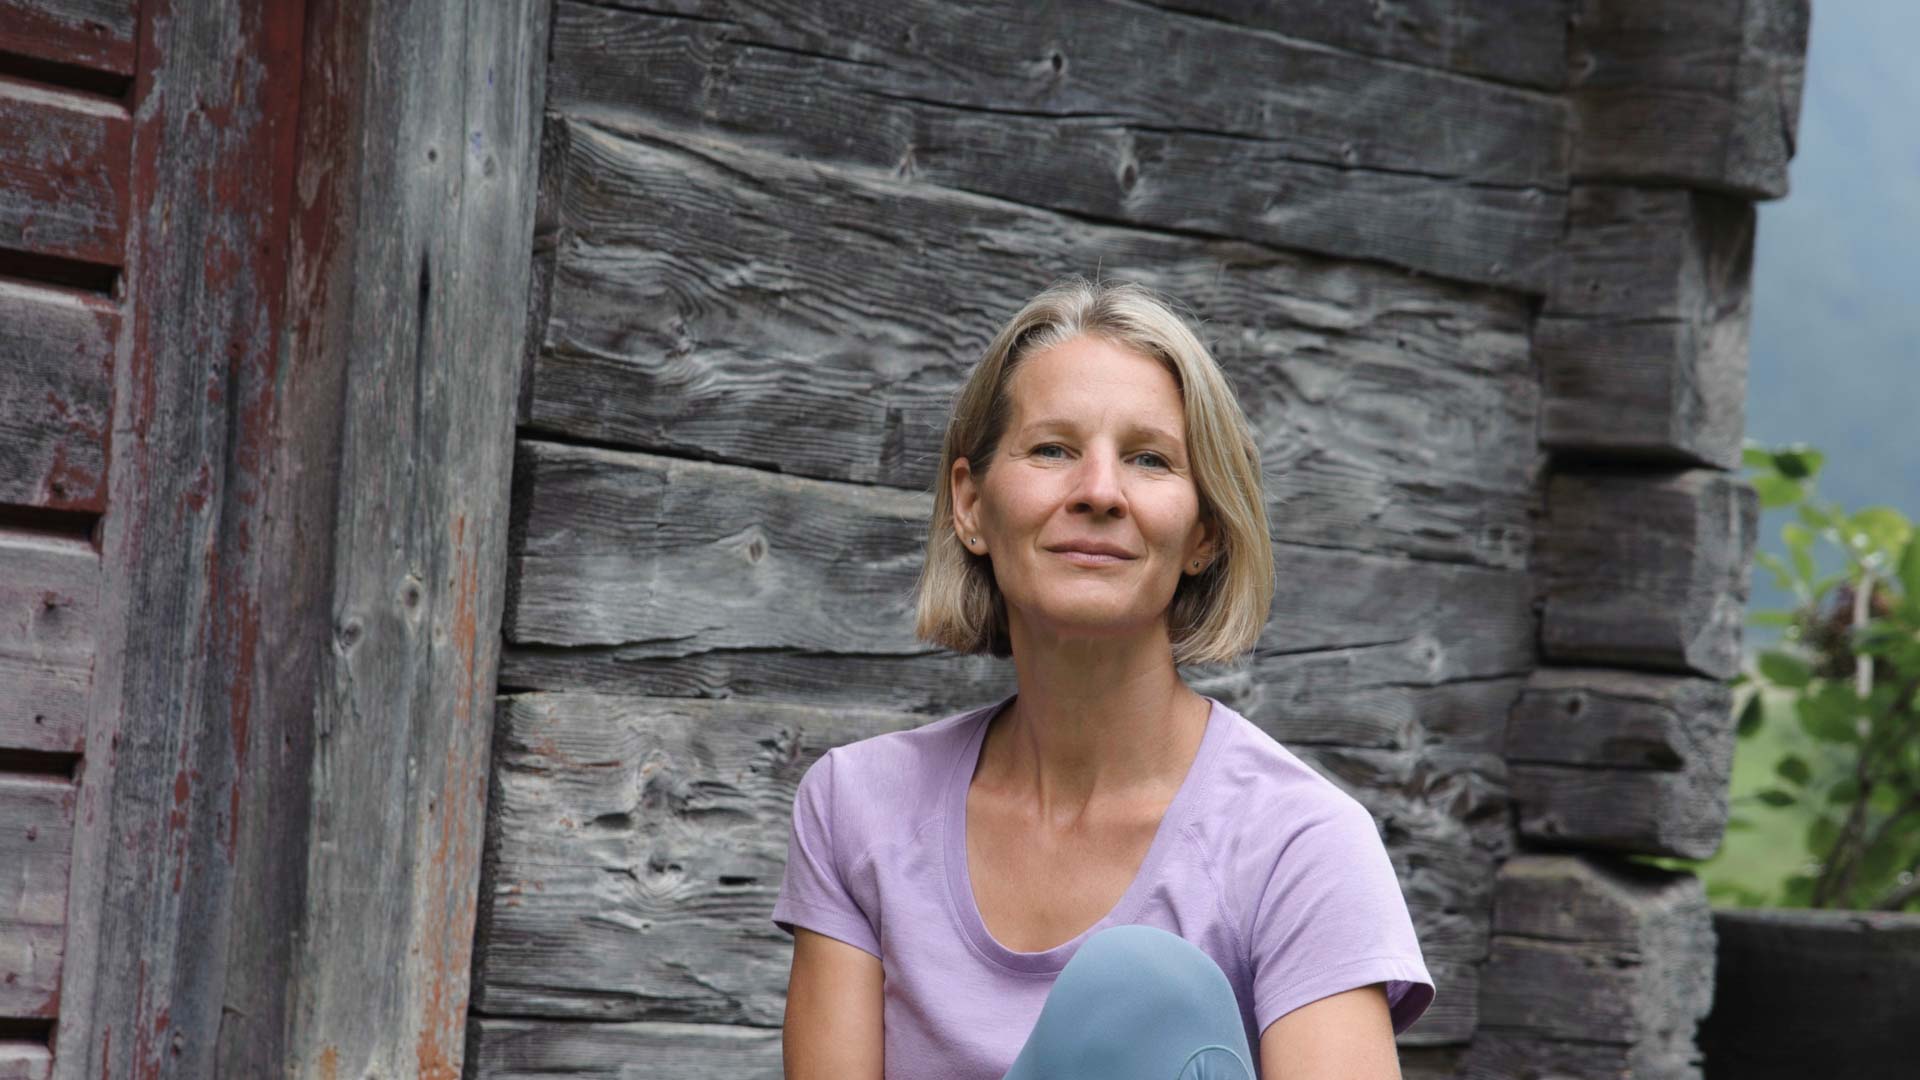 You are currently viewing Yogapraxis für Kletterer: Petra Zink – Outdoor Yoga und Bergsport